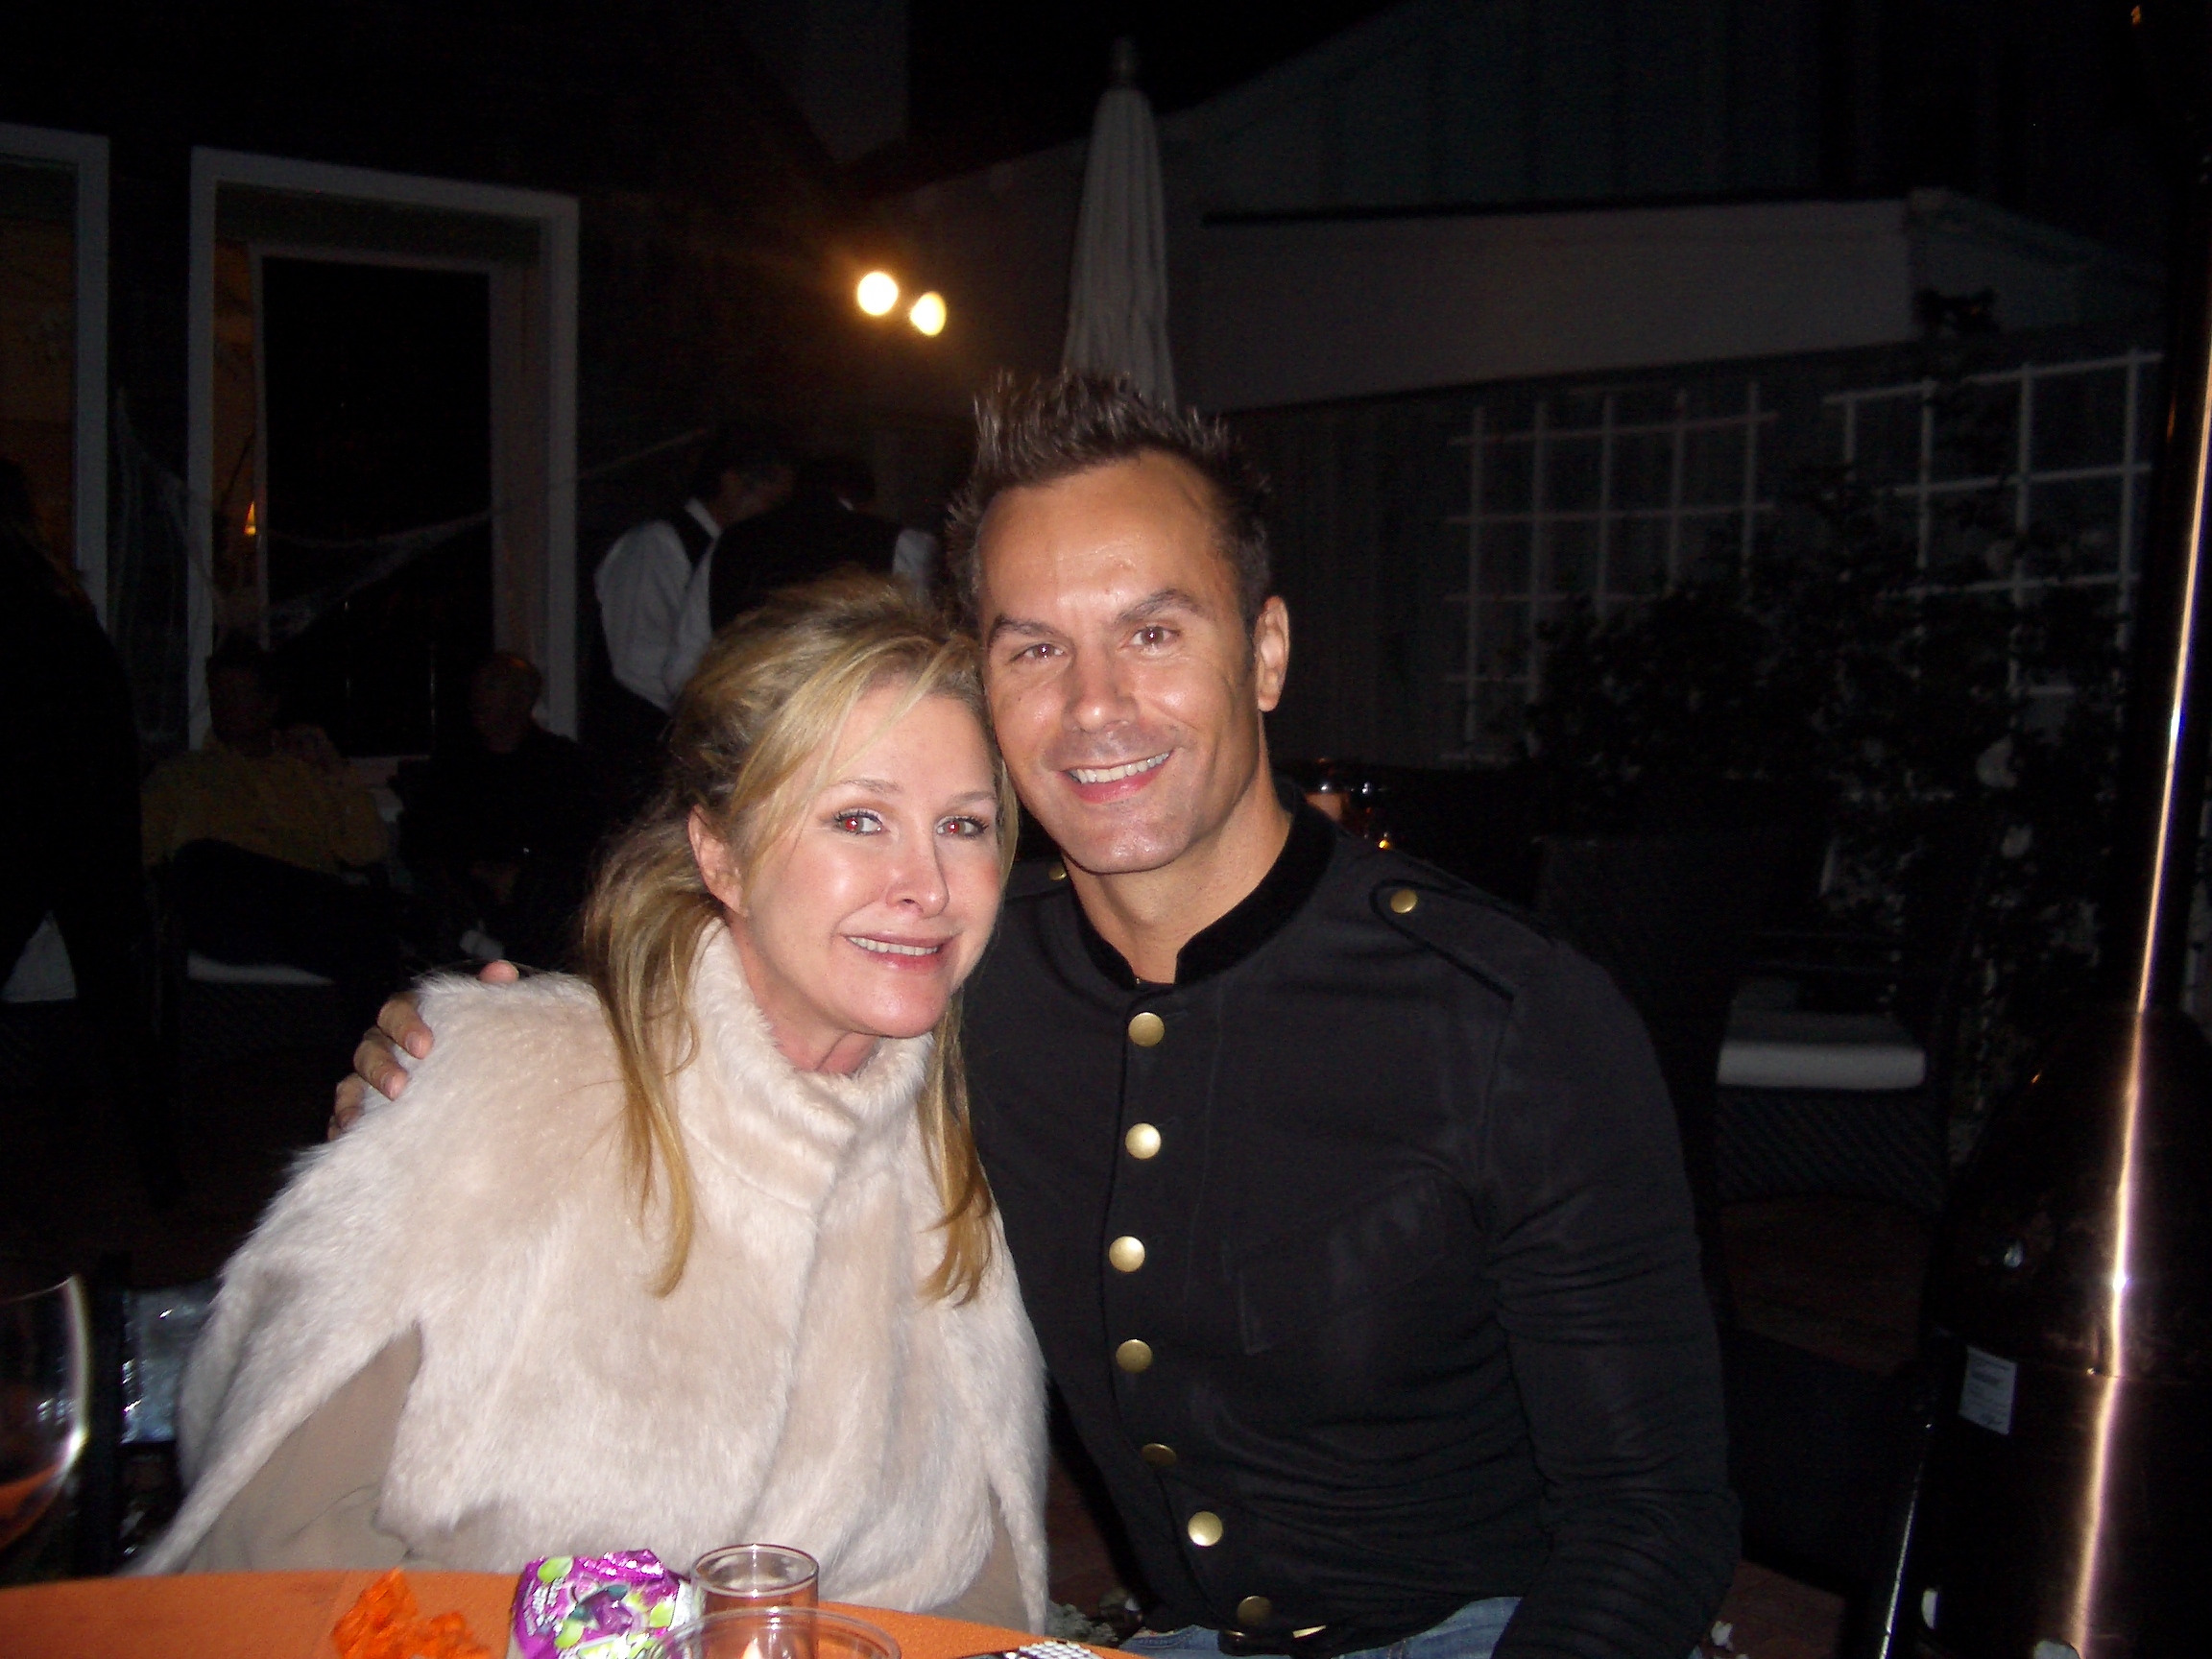 Mark Lund and Kathy Hilton at a Halloween Party at the Hilton's home in Malibu.